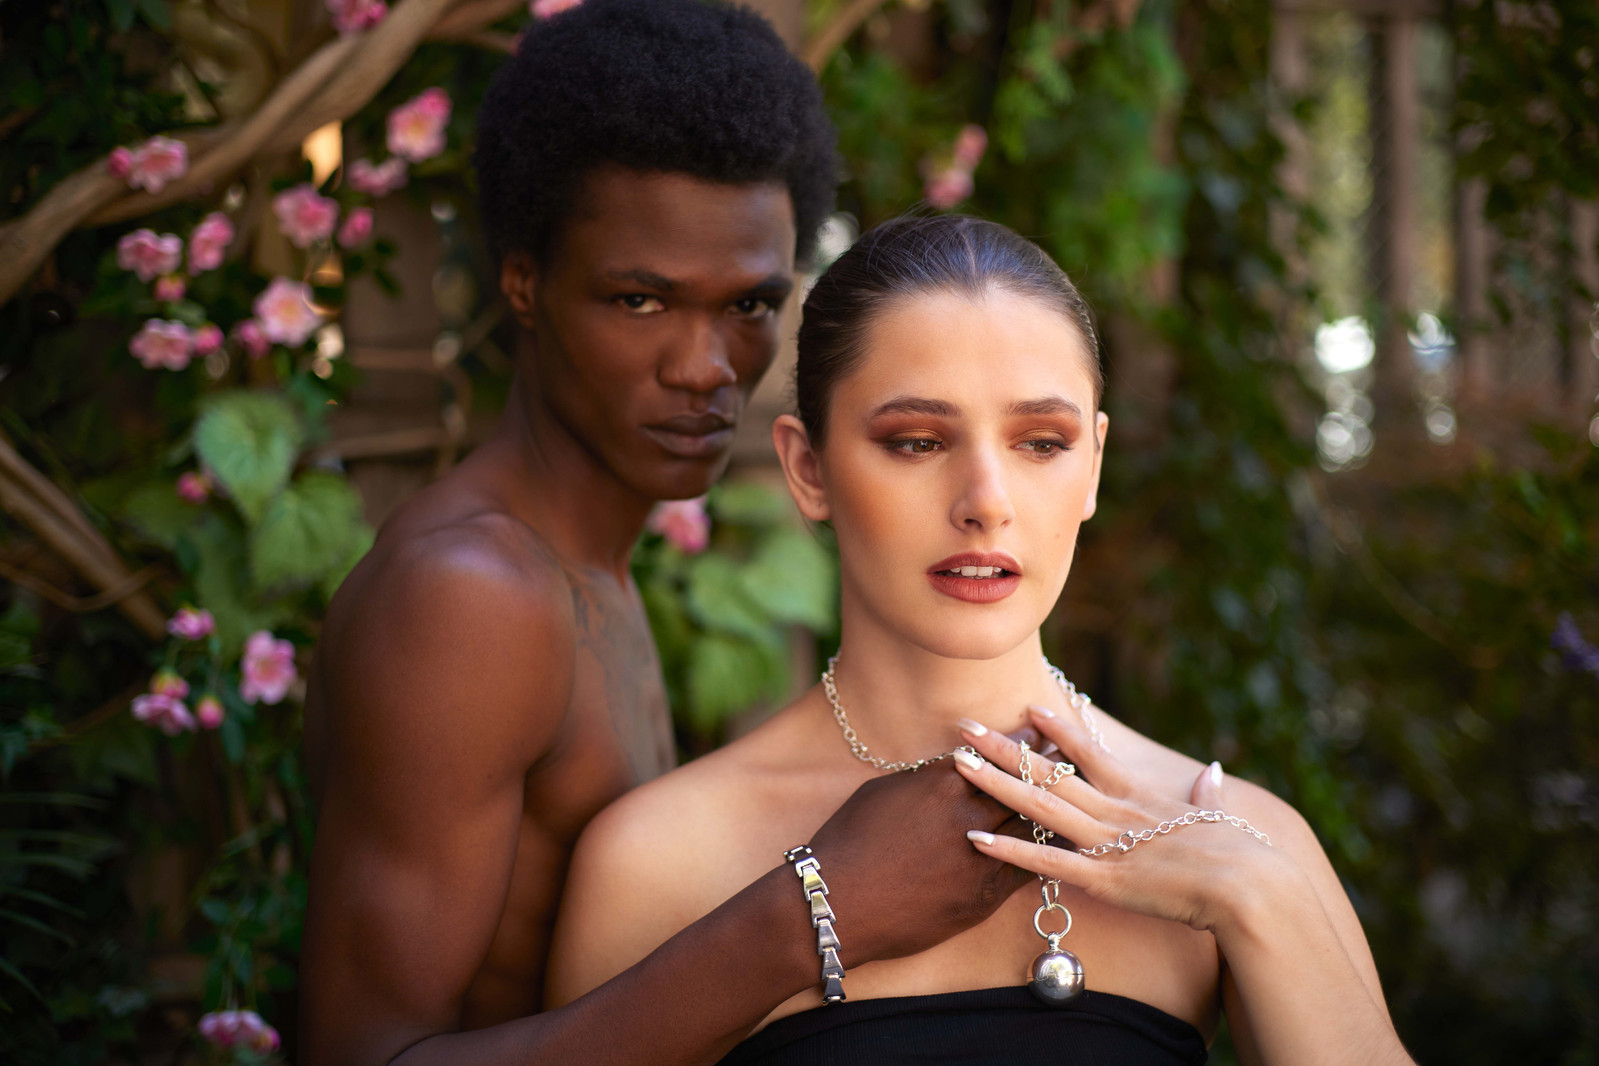 With Fenton Models, Zulu and Zoie, this fashion shoot was featured in Penida Magazine. On display are beautiful accessories by Pianegonda Jewelry.